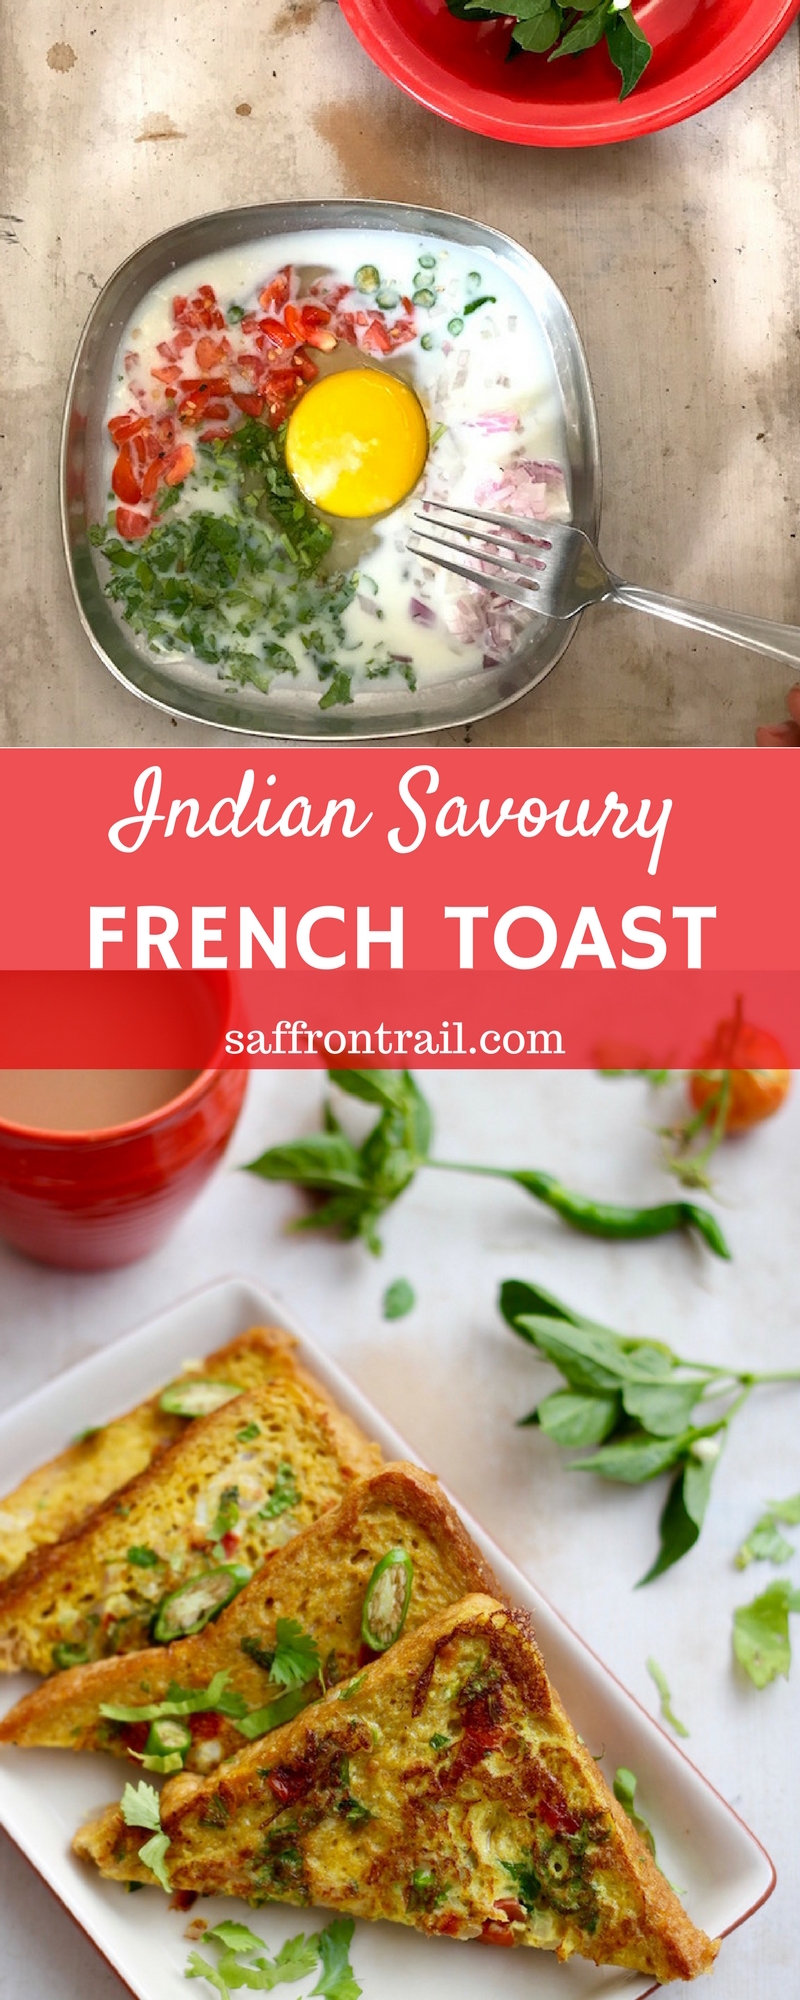 If you haven't had a savoury French toast Indian style (Masala French toast), all spiced up, then it's time to remedy that pronto. Pantry ingredients, 5 minutes, easy enough for a newbie cook and breakfast is ready.